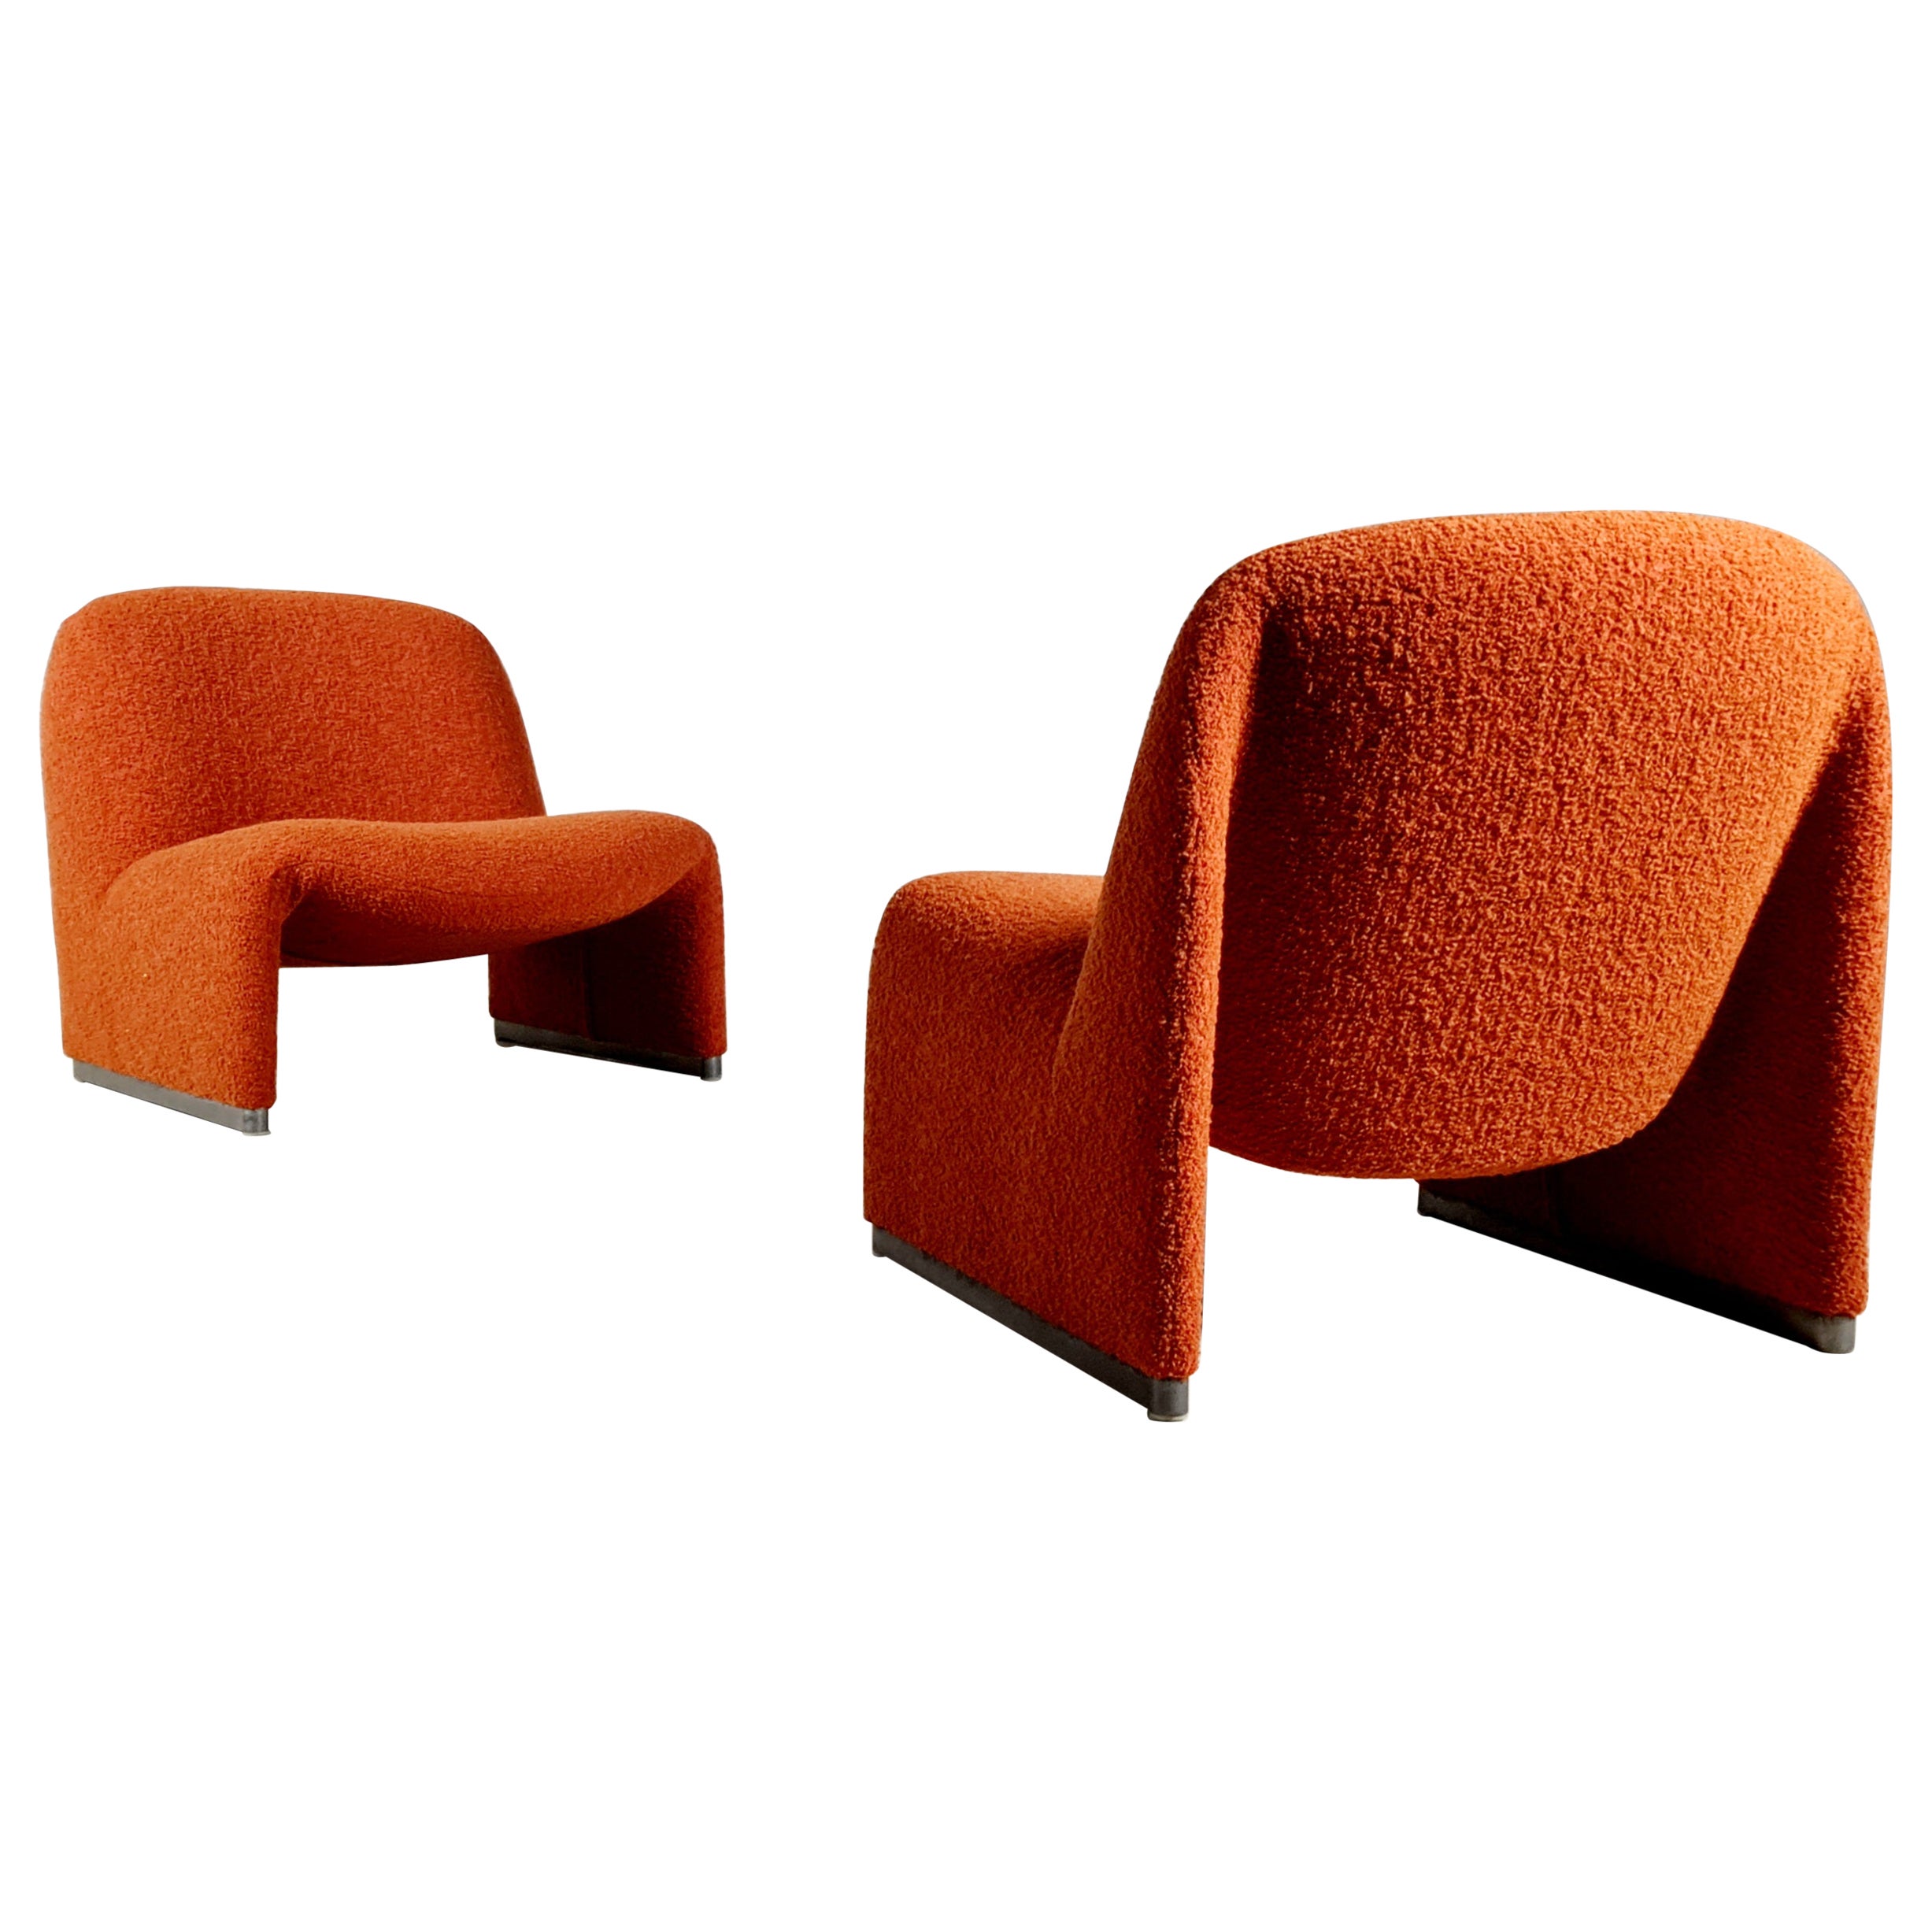 Set of 2 Alky Chairs by Giancarlo Piretti for Castelli, 1970s